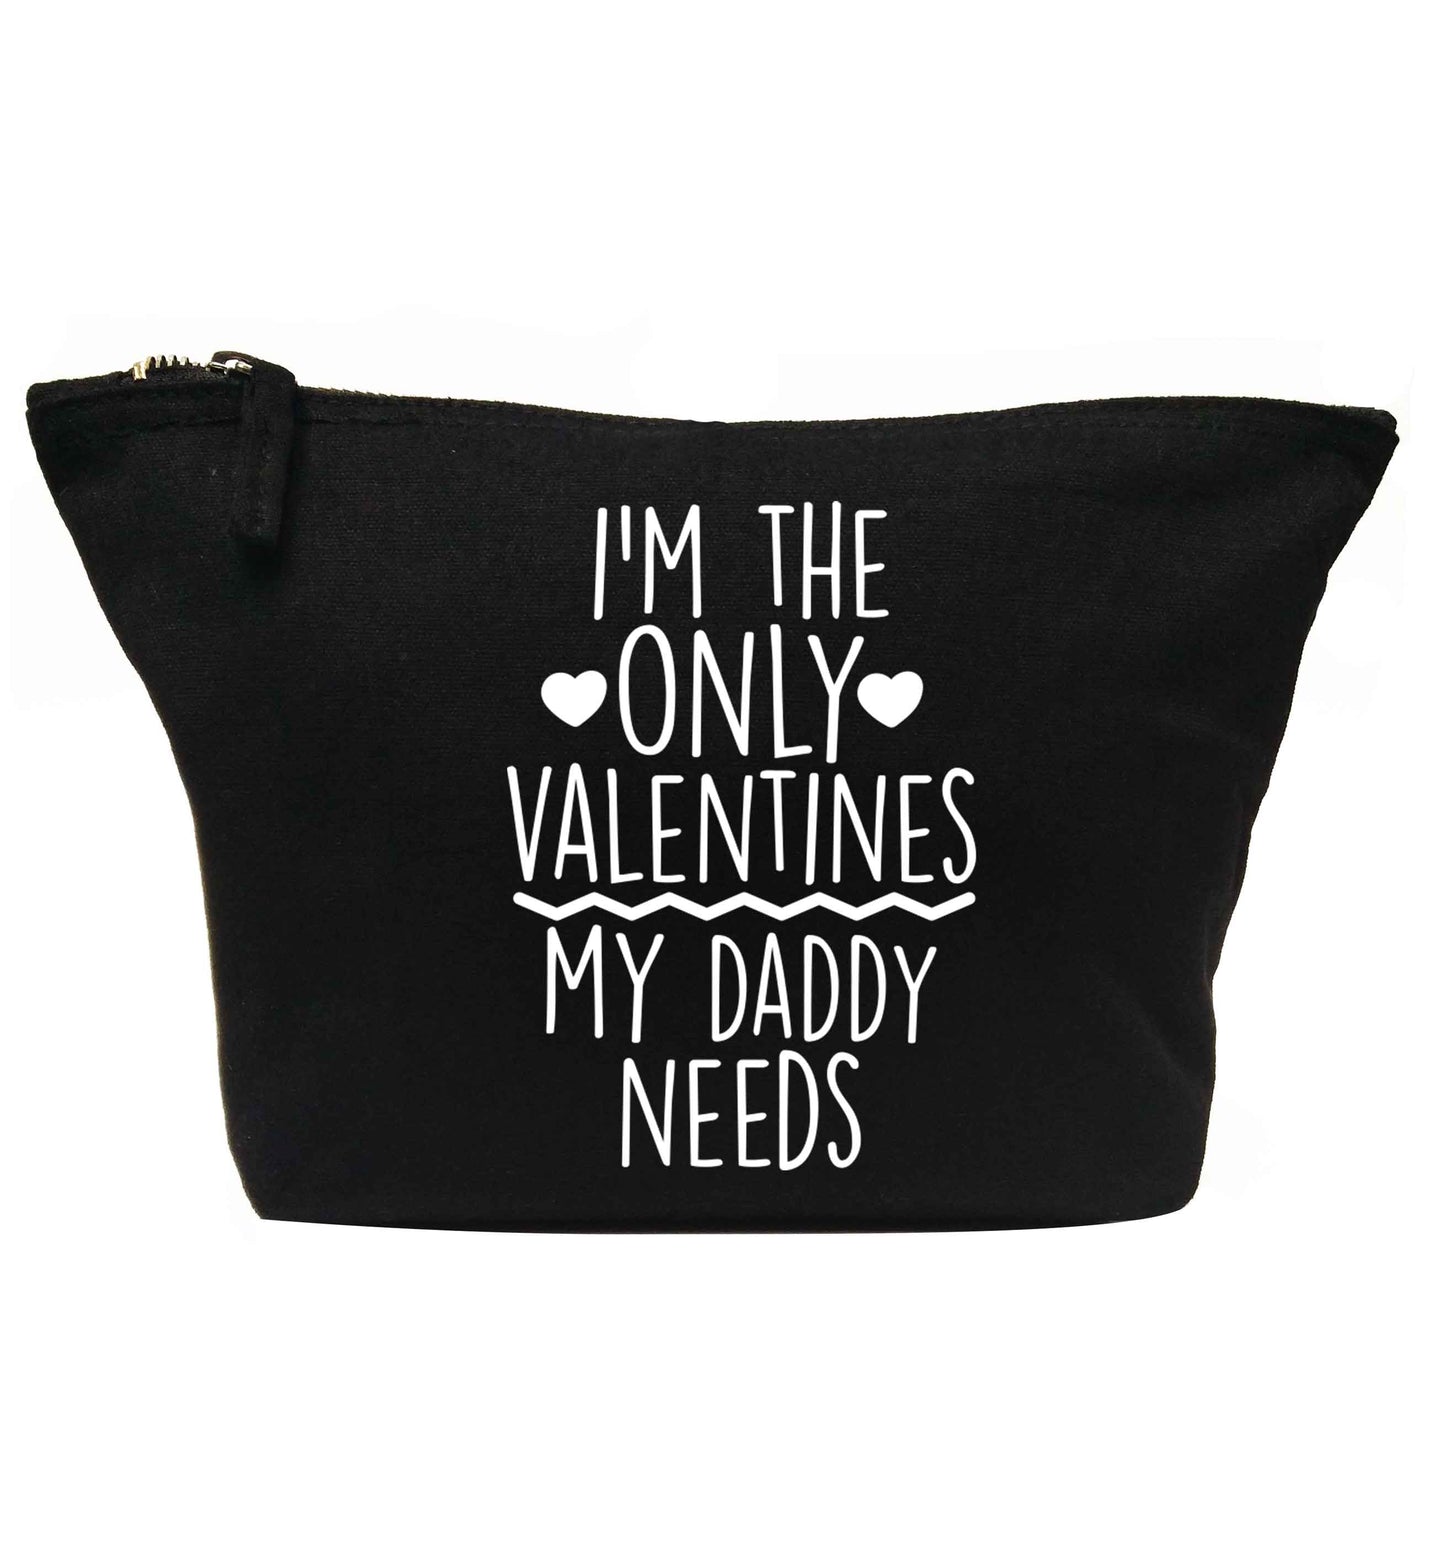 I'm the only valentines my daddy needs | Makeup / wash bag